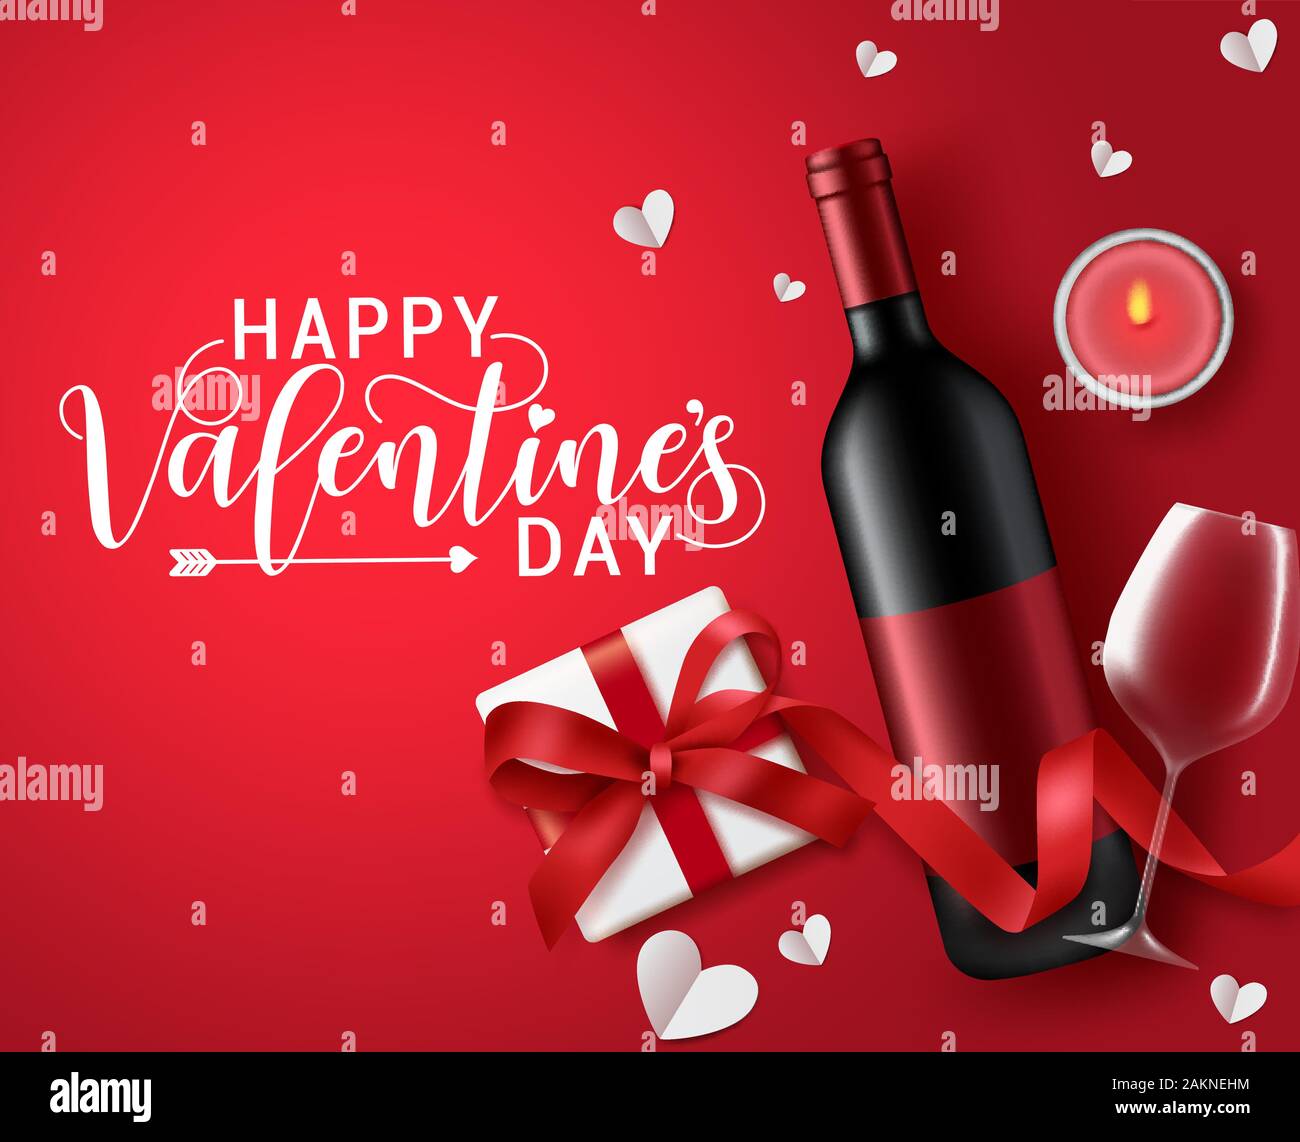 Valentines dating wine vector banner. Happy valentines day greeting text with dating champagne, wine glass, candle light and gift elements. Stock Vector